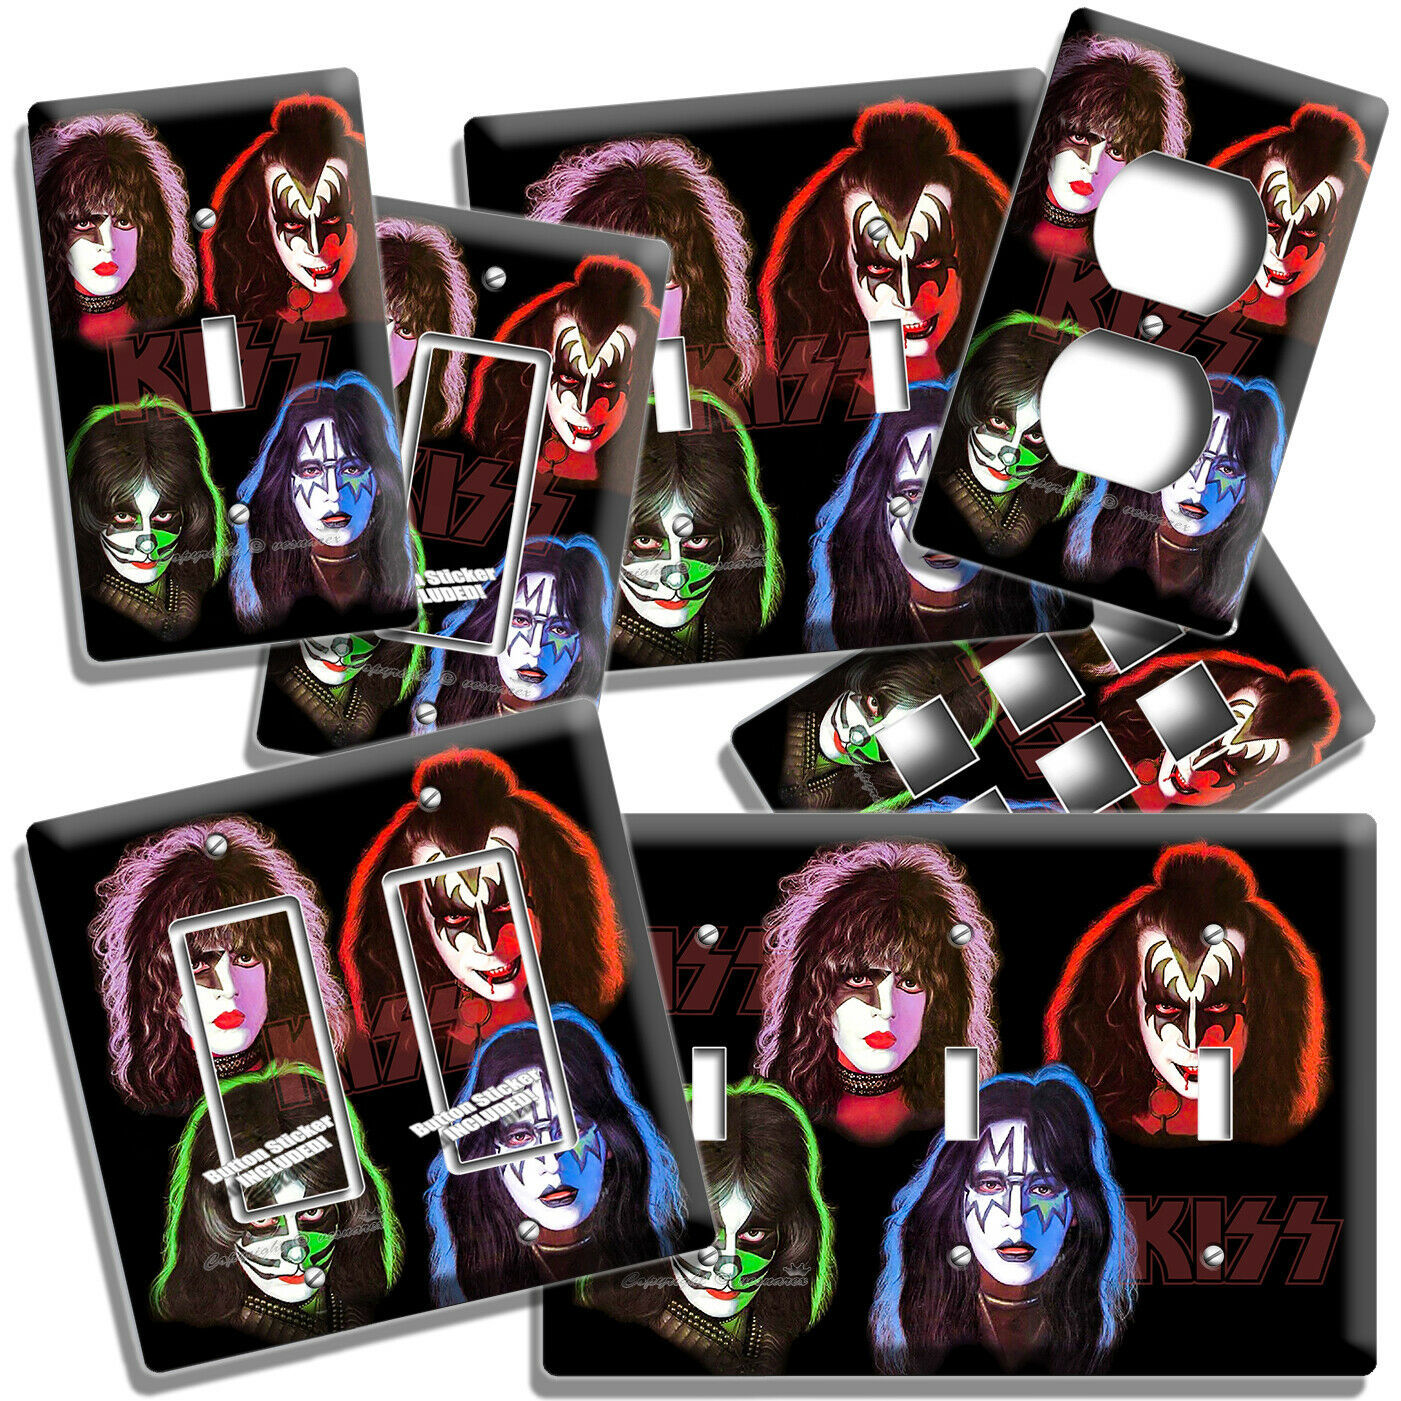 KISS HARD ROCK BAND SOLO ALBUM INSPIRED LIGHT SWITCH OUTLET PLATES STUDIO DECOR